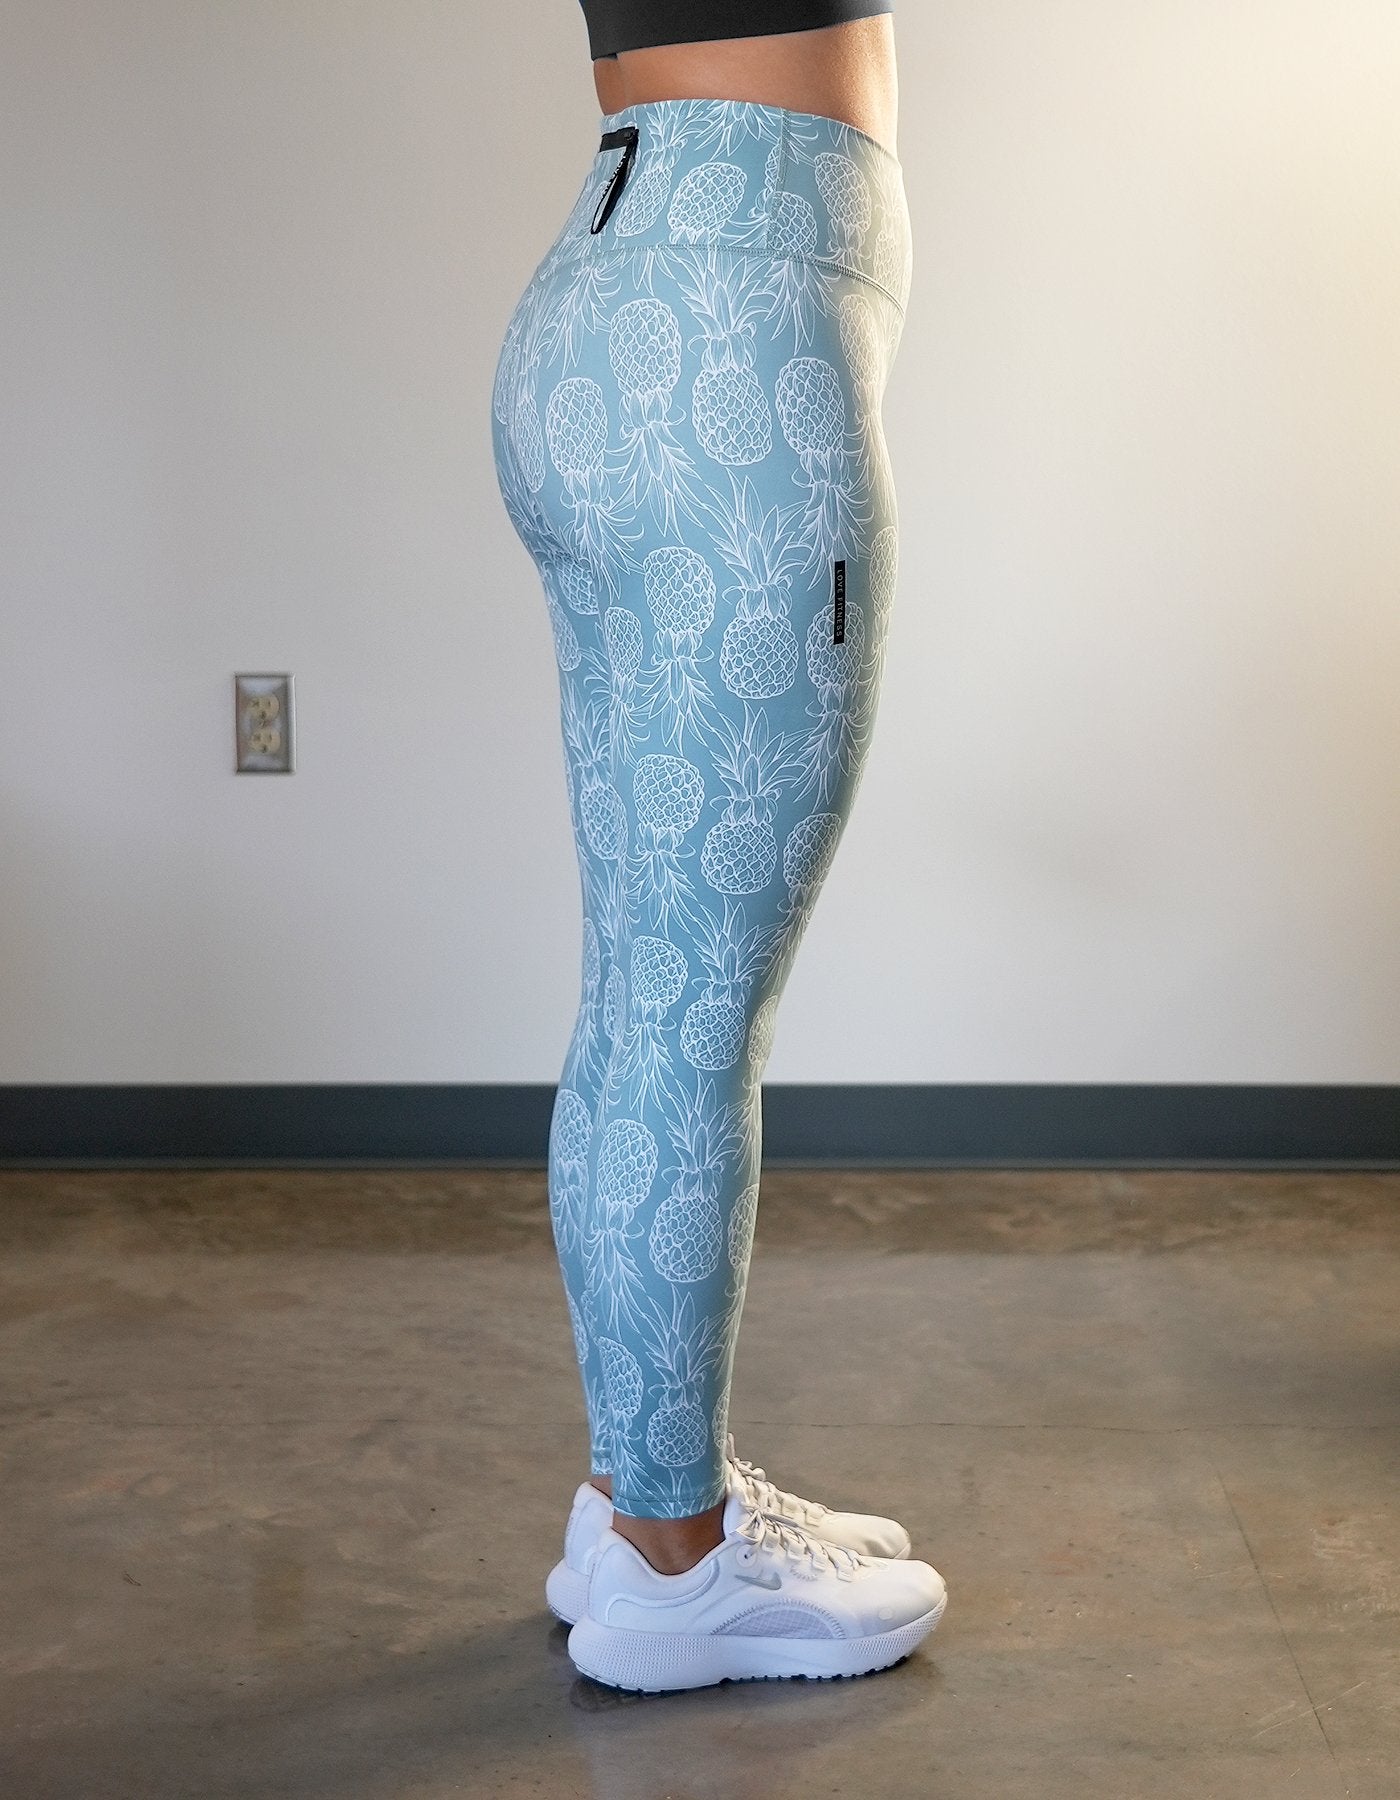 Crimson tavernorlando most popular pineapple leggings in dusty blue. Work out, going out and ocean approved